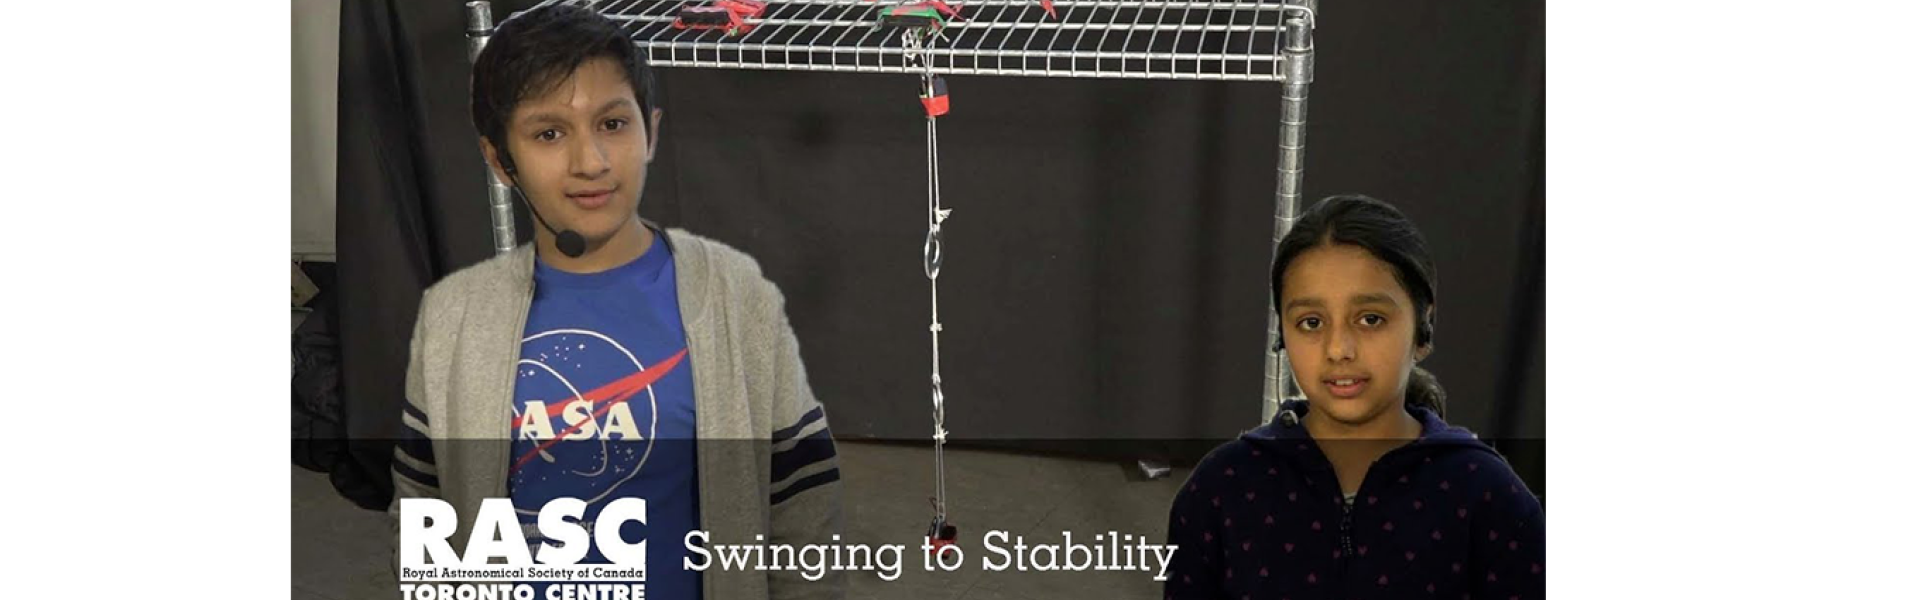 Swinging to Stability